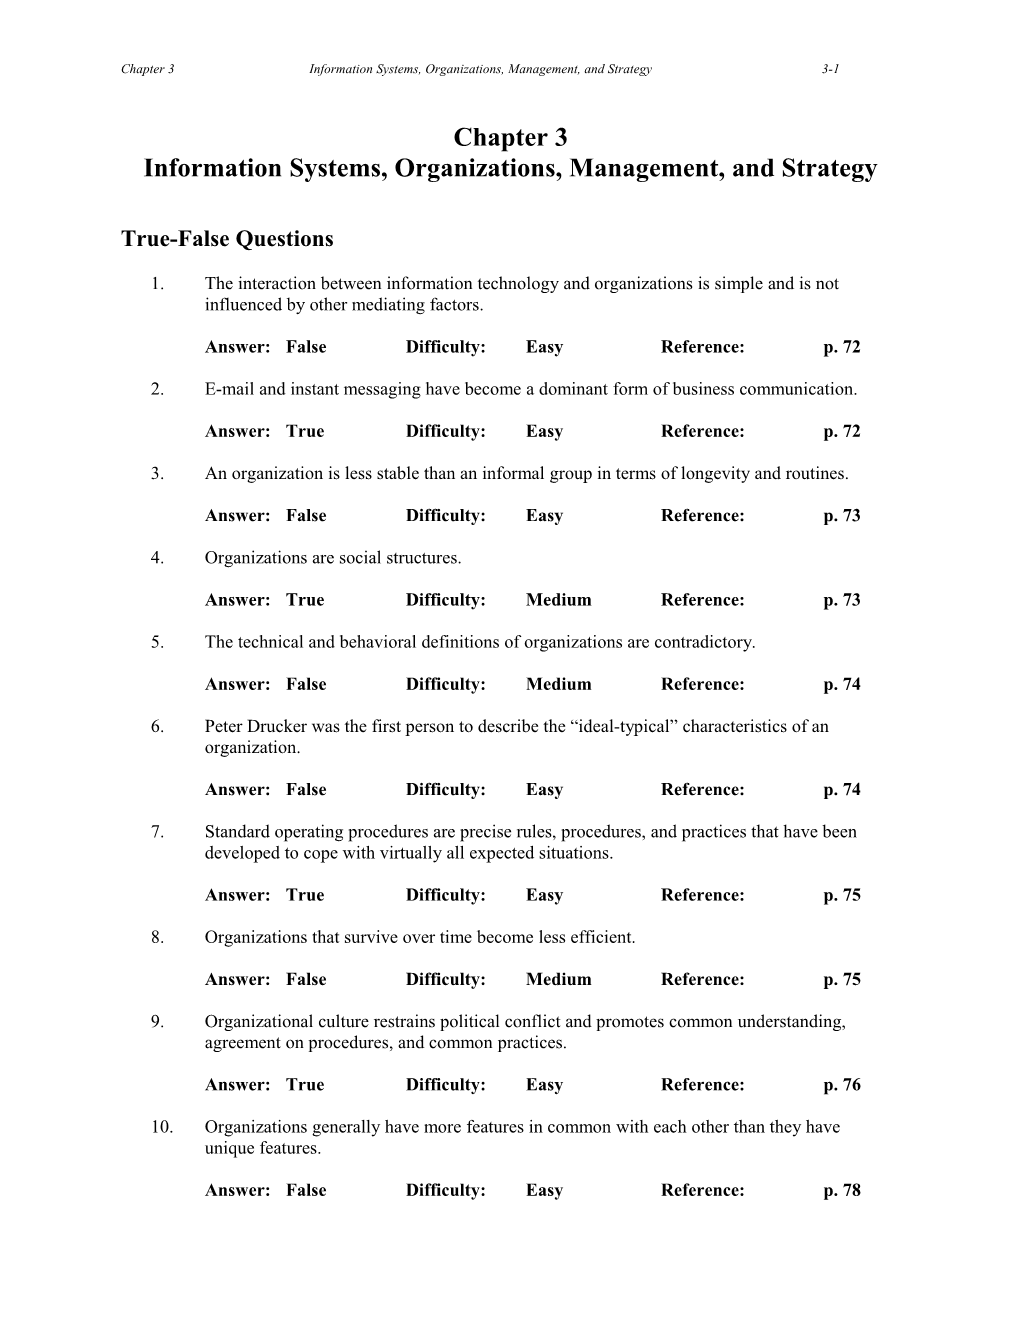 Chapter 3: Information Systems, Organizations, Management, and Strategy